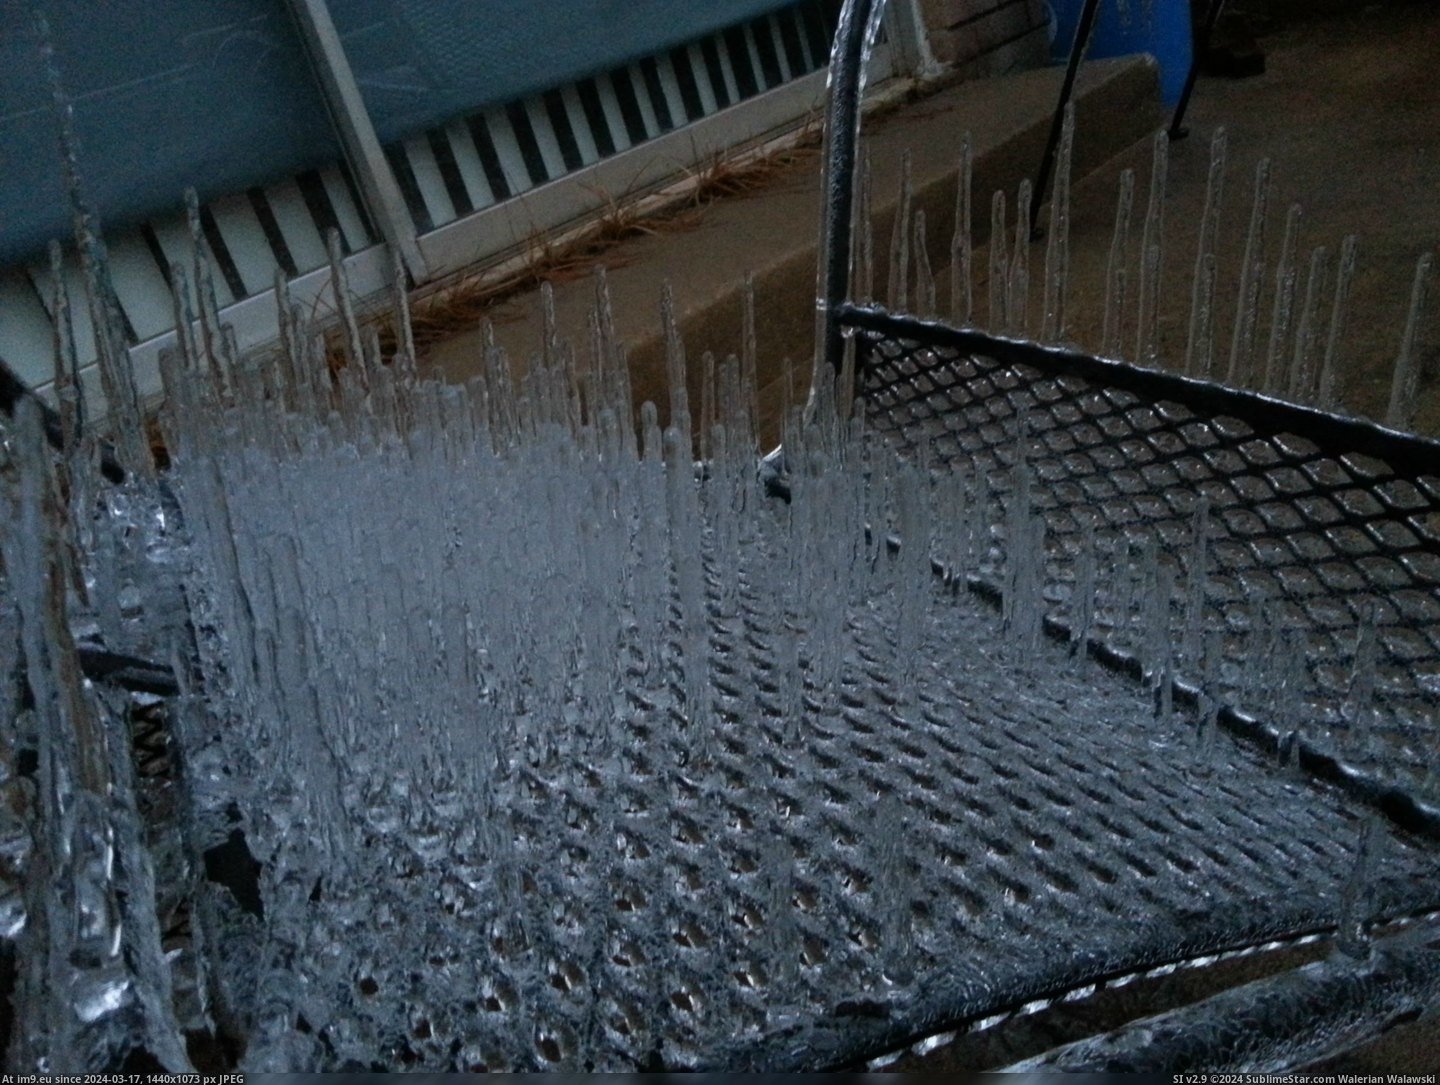 #Ice #Storm #Mesh #Furniture #Patio [Mildlyinteresting] This is what happens to mesh patio furniture in an ice storm 2 Pic. (Image of album My r/MILDLYINTERESTING favs))